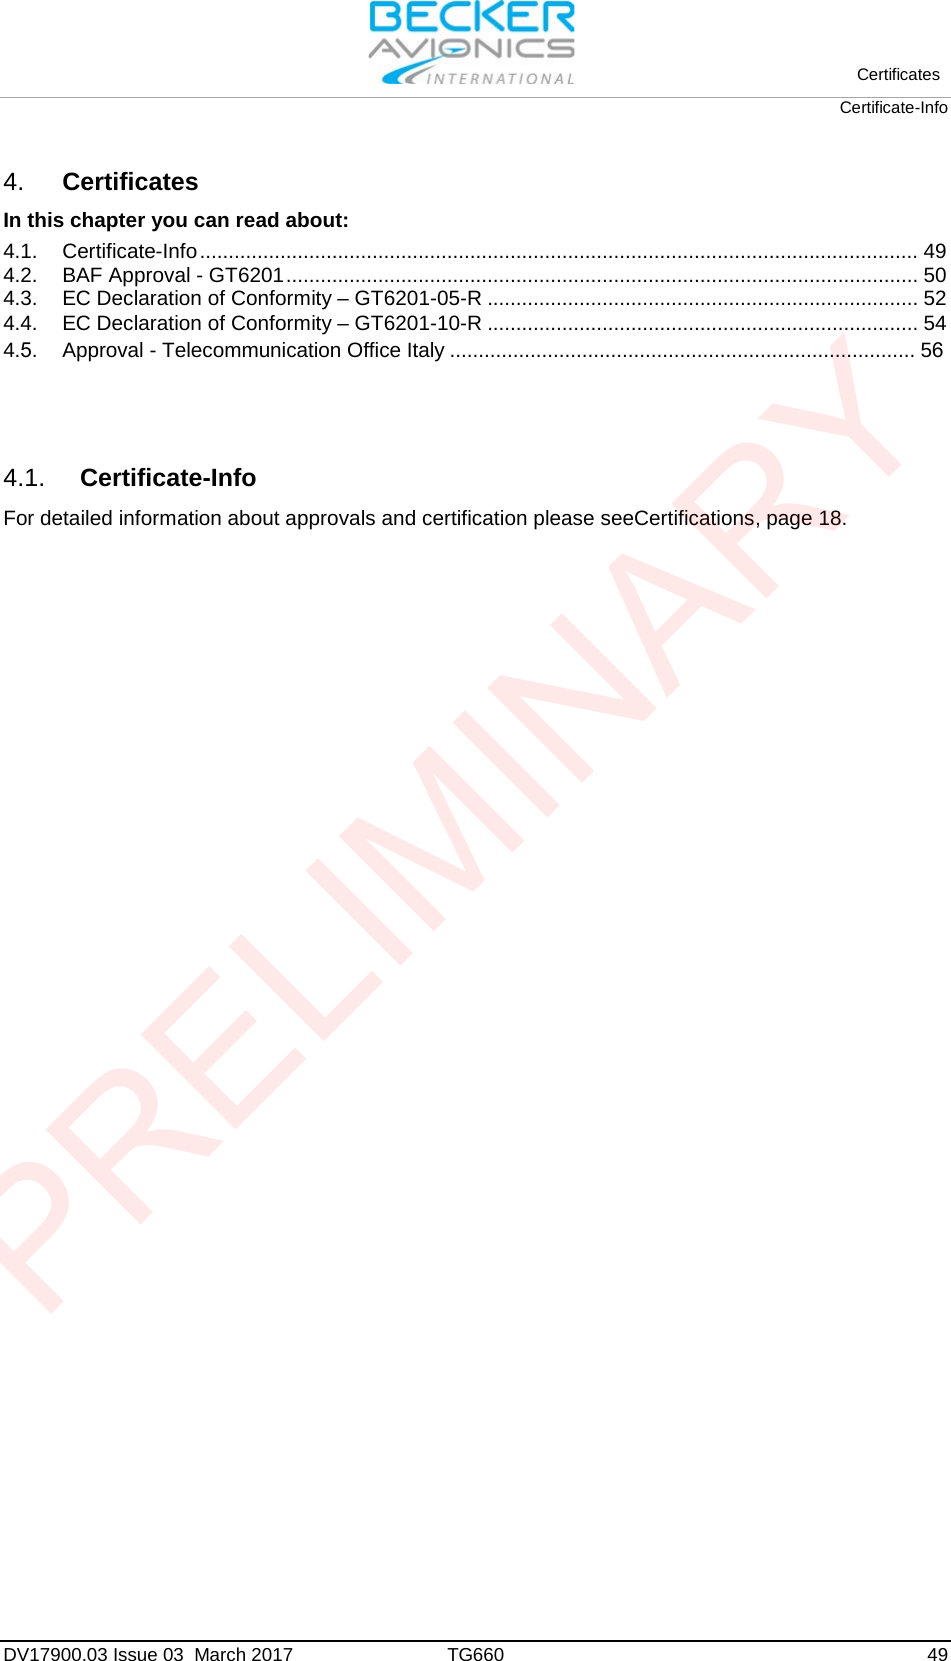 Certificates Certificate-Info DV17900.03 Issue 03  March 2017 TG660 49 4. CertificatesIn this chapter you can read about: 4.1. Certificate-Info ............................................................................................................................. 49 4.2. BAF Approval - GT6201 .............................................................................................................. 50 4.3. EC Declaration of Conformity – GT6201-05-R ........................................................................... 52 4.4. EC Declaration of Conformity – GT6201-10-R ........................................................................... 54 4.5. Approval - Telecommunication Office Italy ................................................................................. 56 4.1. Certificate-Info For detailed information about approvals and certification please seeCertifications, page 18. PRELIMINARY